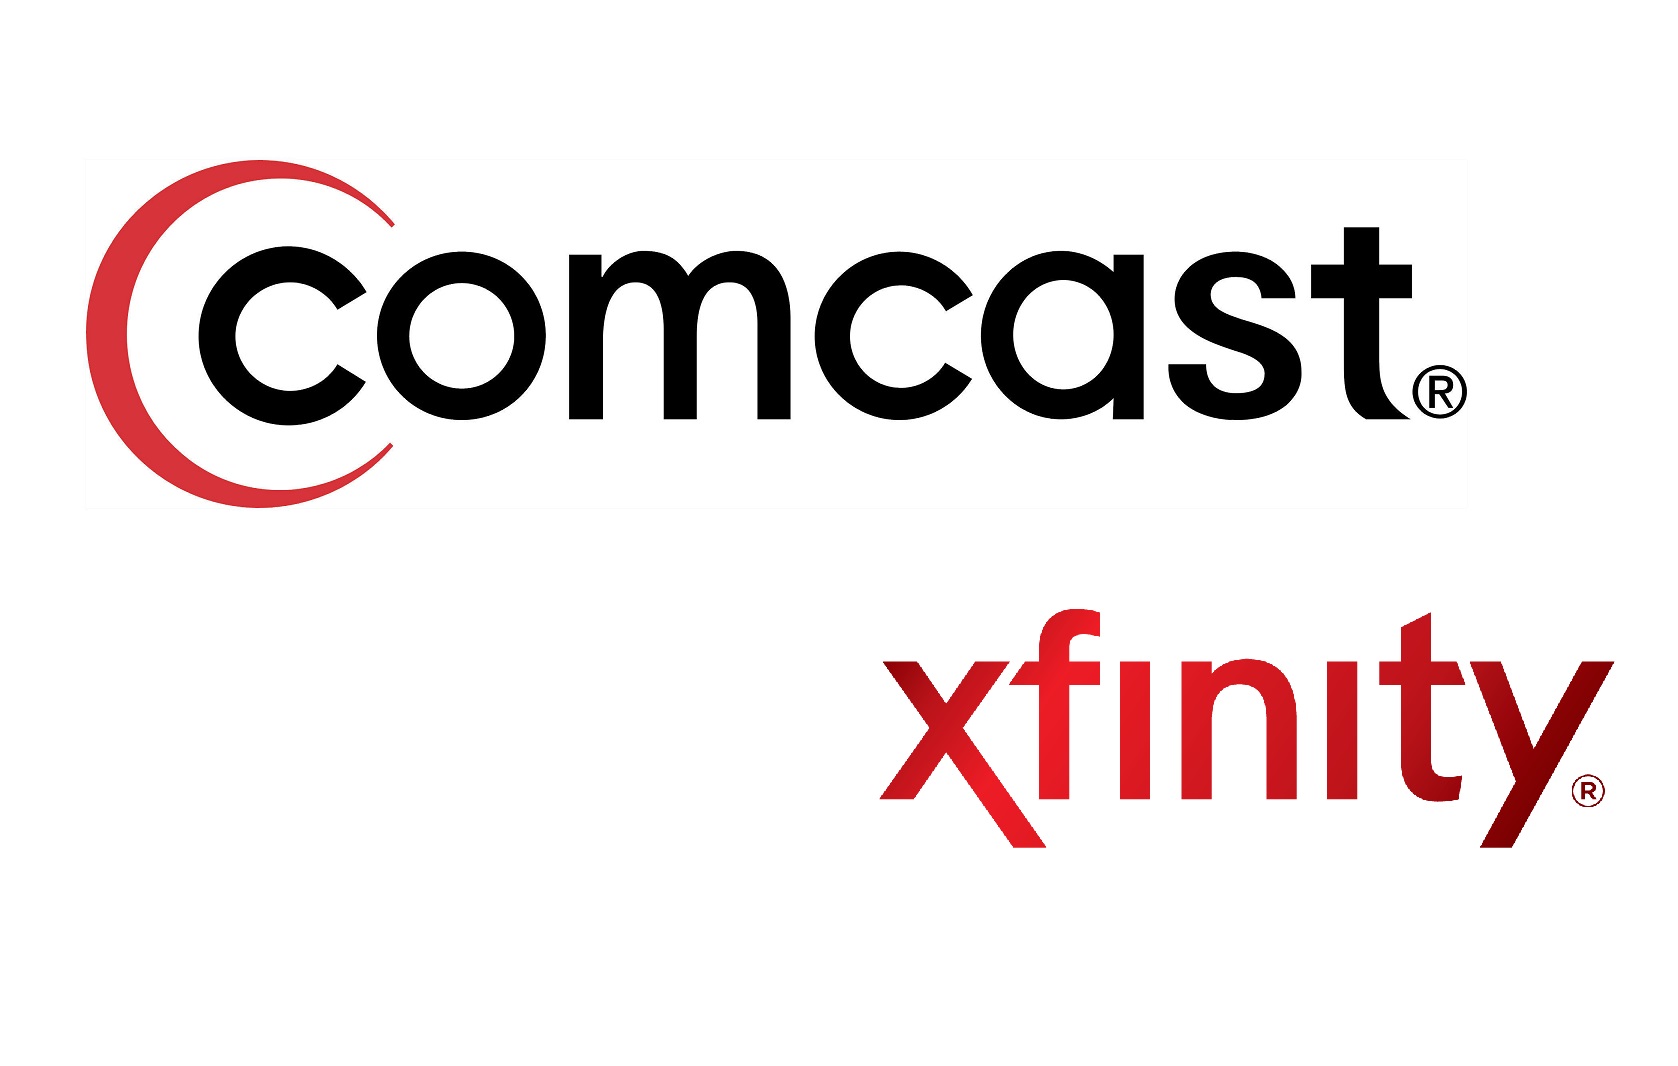 Comcast Rolls Out Datacaps to 18 New Markets in the “Principle of Fairness”